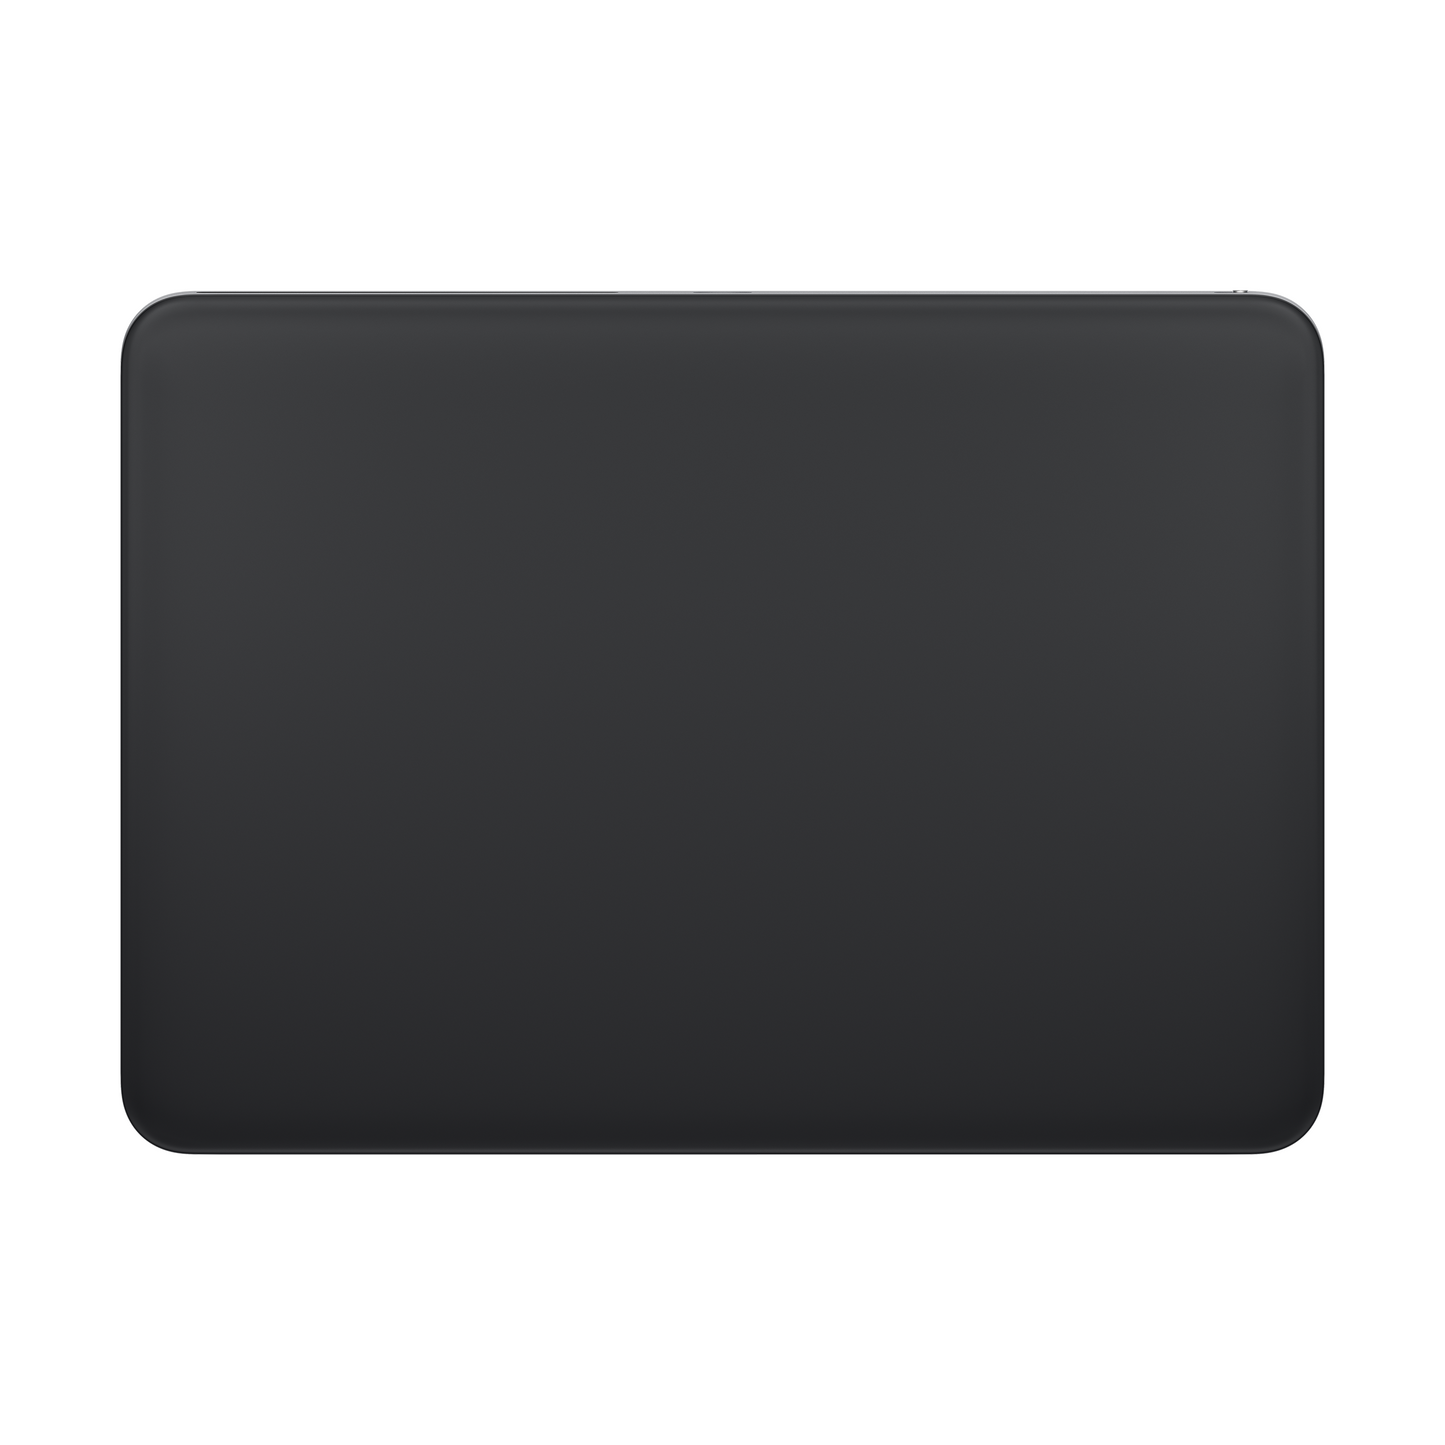 Magic Trackpad - Black Multi-Touch Surface (2022)